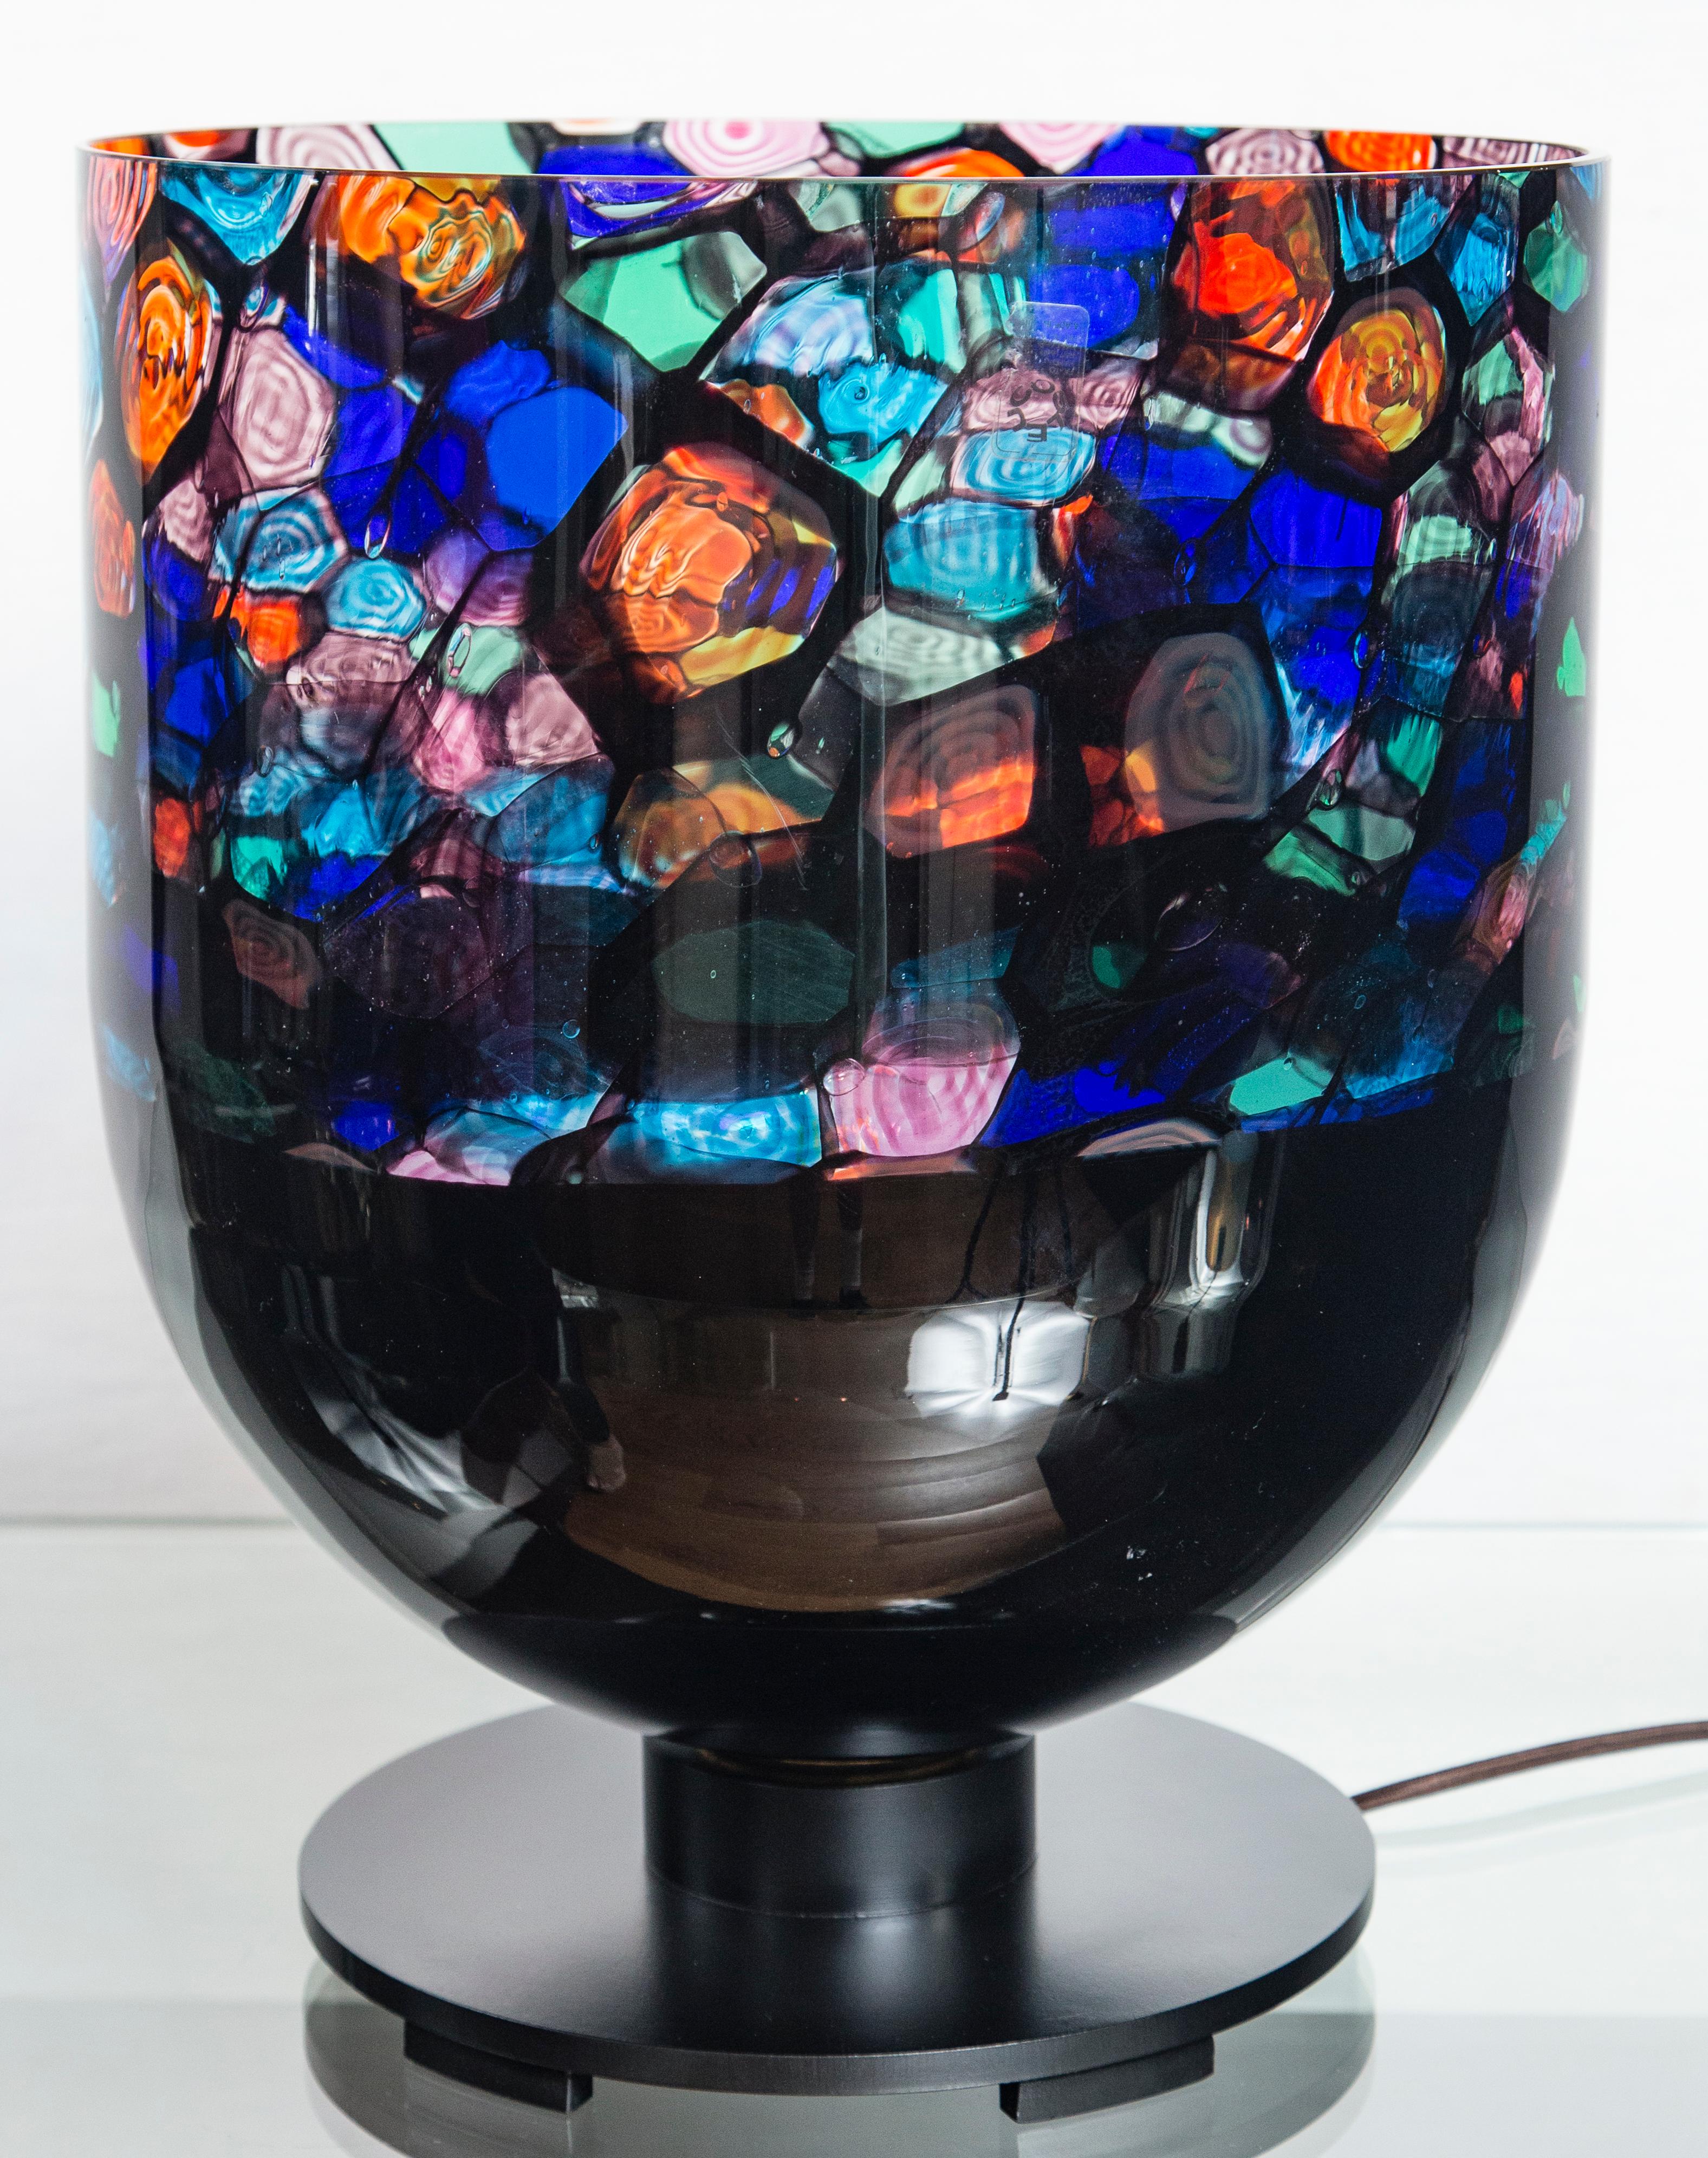 Murano blown Murrine table lamp by Noti Massari for Leucos
Beautiful multi-color patterns and swirls are reflected more brightly with interior base in white glass while the exterior bottom portion of the base remains black blending with its black